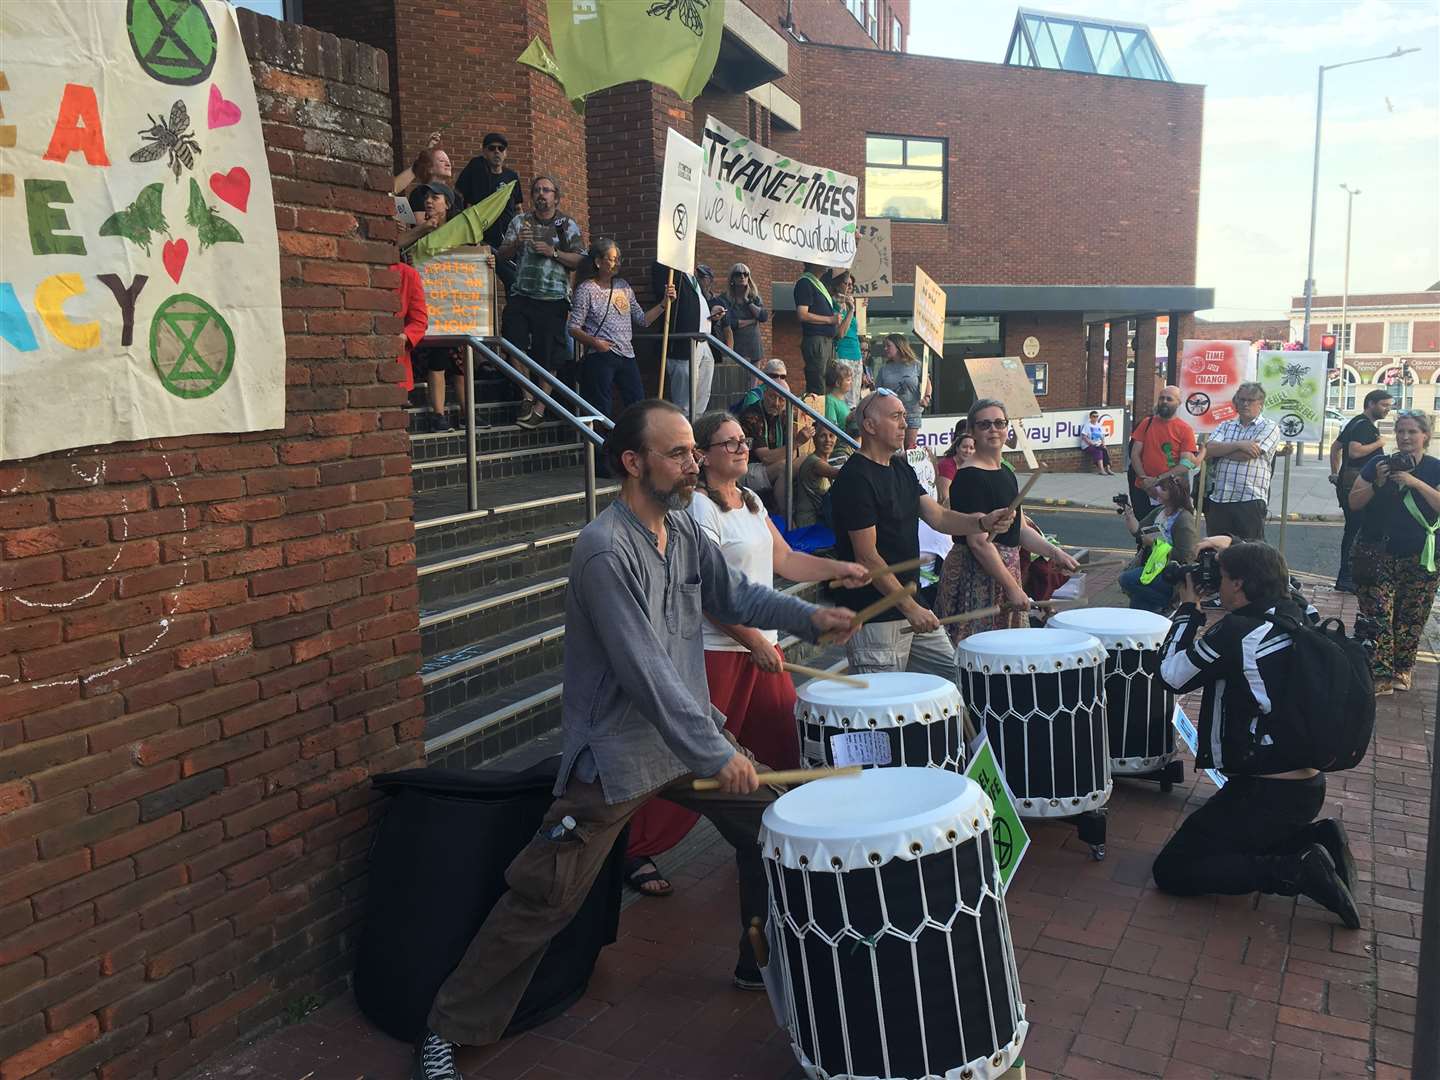 Climate change protest outside Thanet District Council in Margate (13719237)